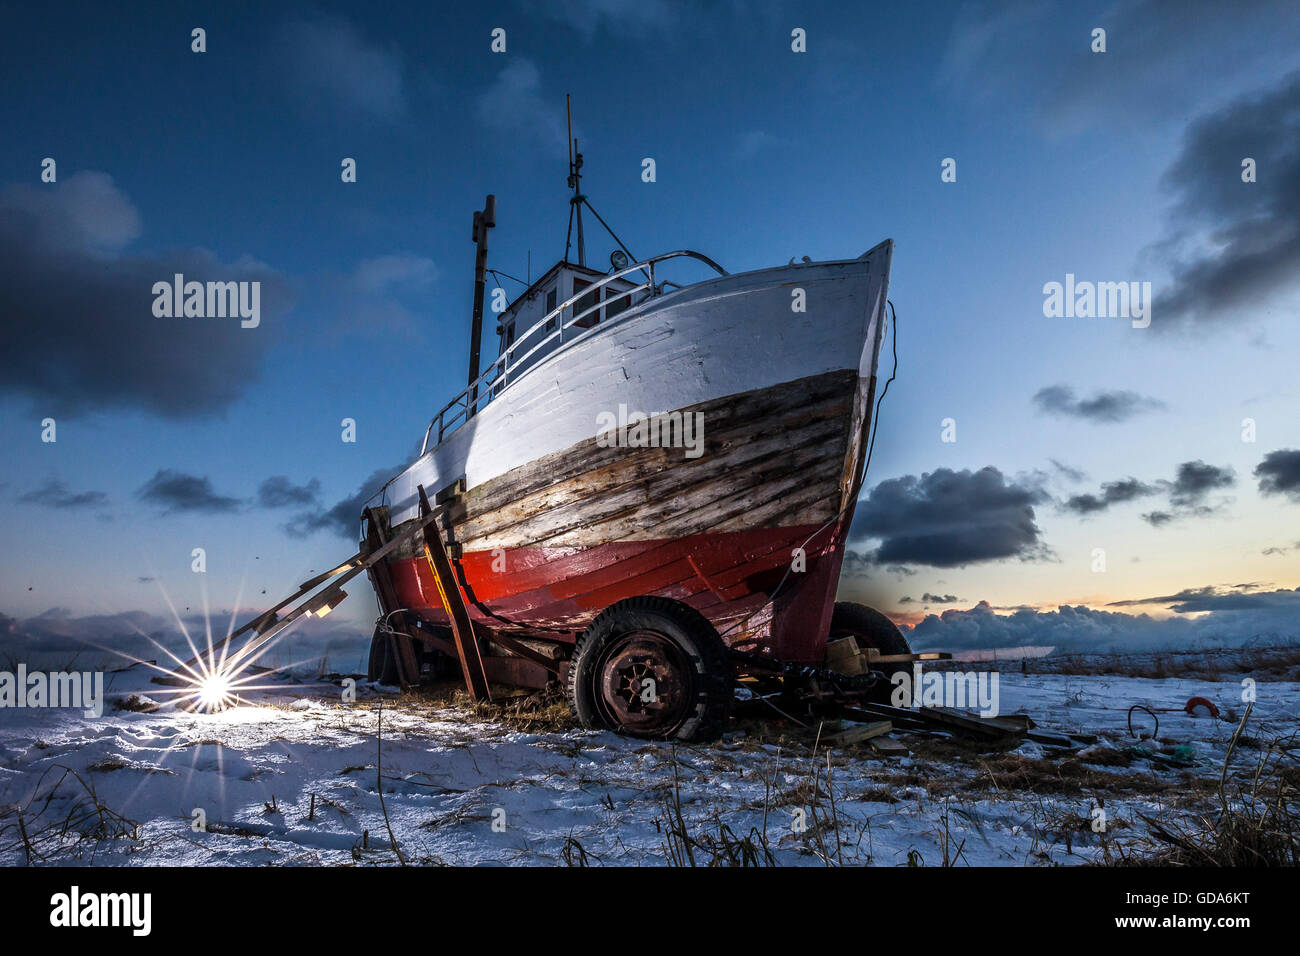 Boat standing on land, Vesteralen, Norway Stock Photo